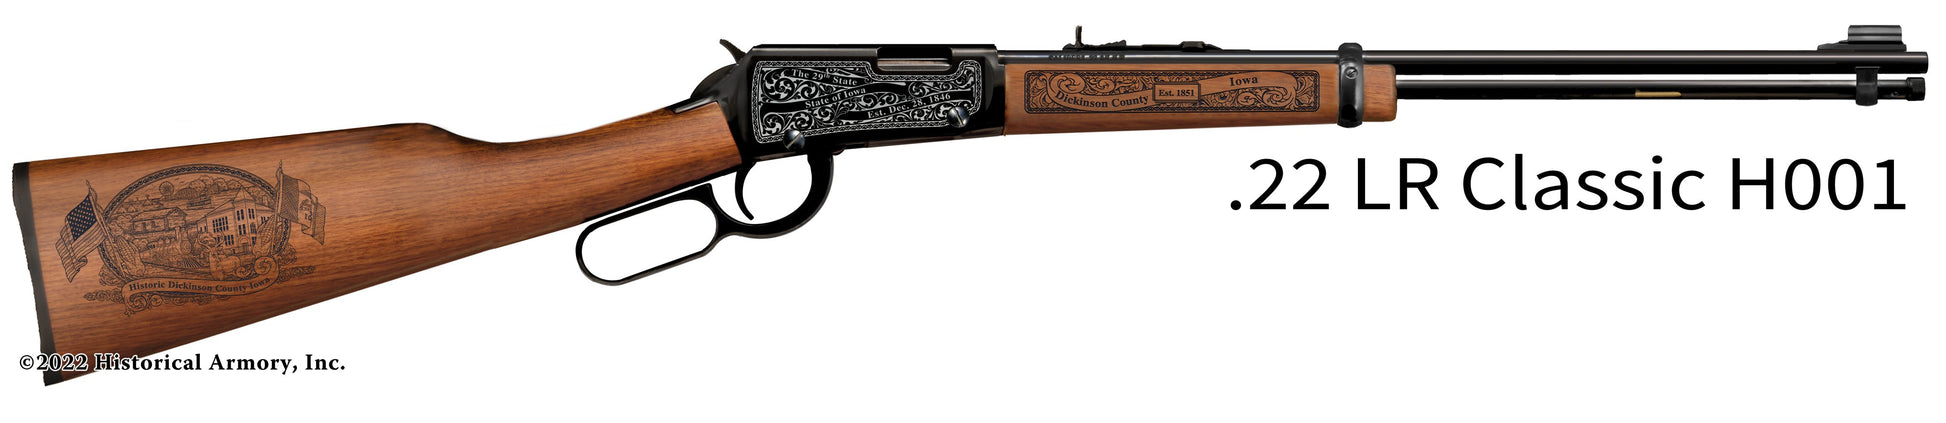 Dickinson County Iowa Engraved Henry H001 Rifle